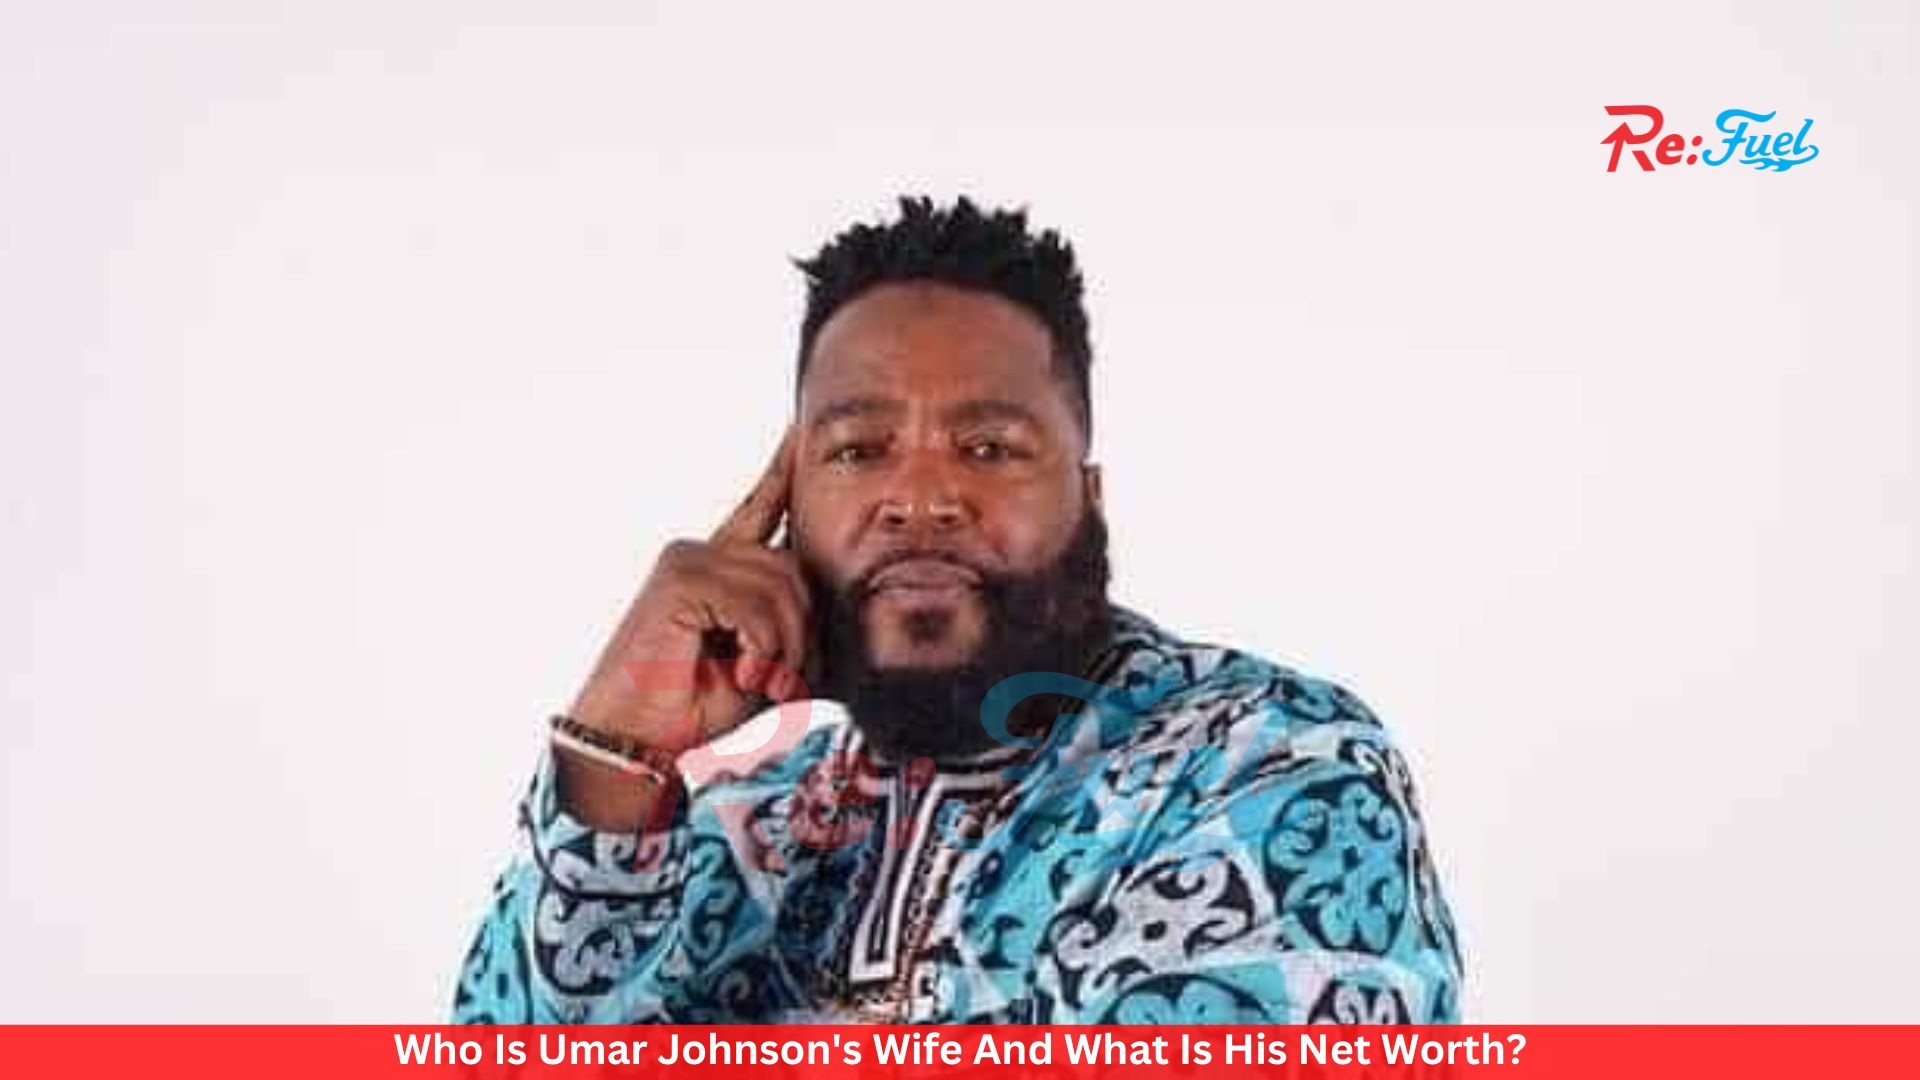 Who Is Umar Johnson's Wife And What Is His Net Worth?